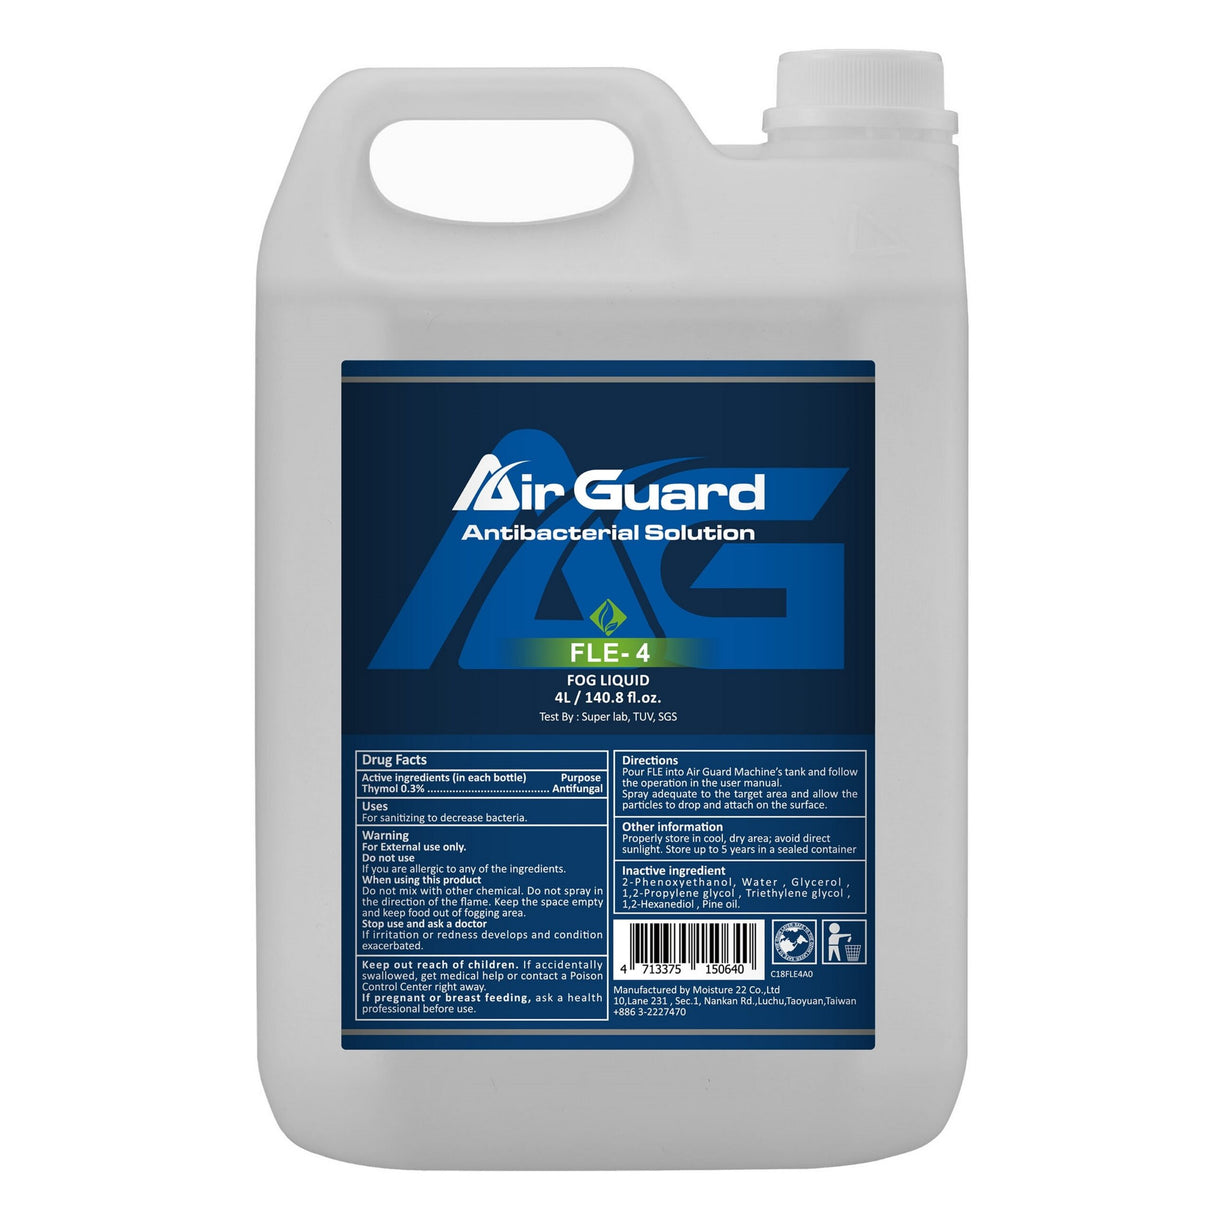 Air Guard FLE-4 4-Liter Bottle of Air Guard Anti-Bacterial Solution, FDA Registered